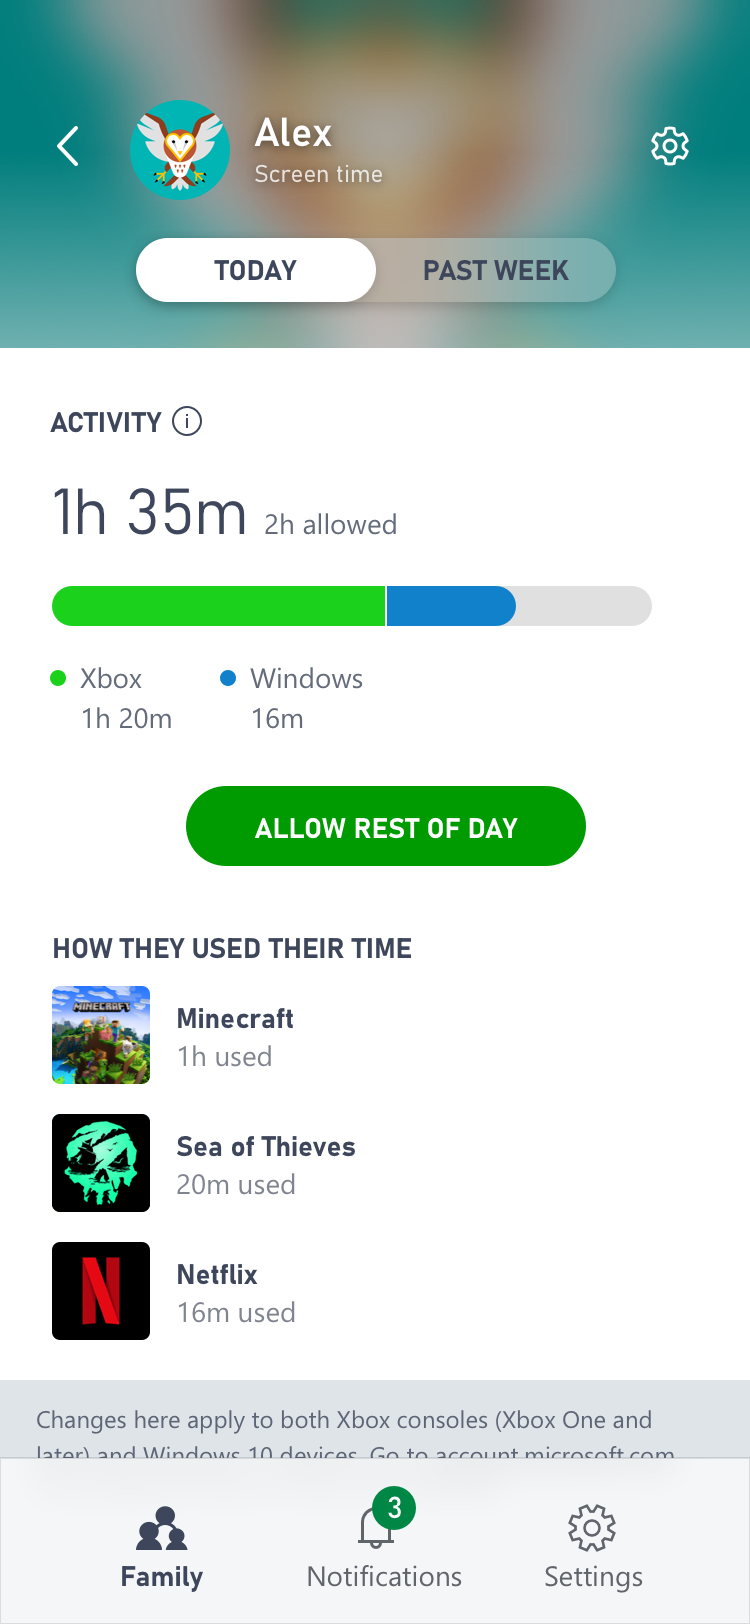 A screenshot of screen time settings on the Xbox parental controls app, showing which games can be played, when, and for how long.